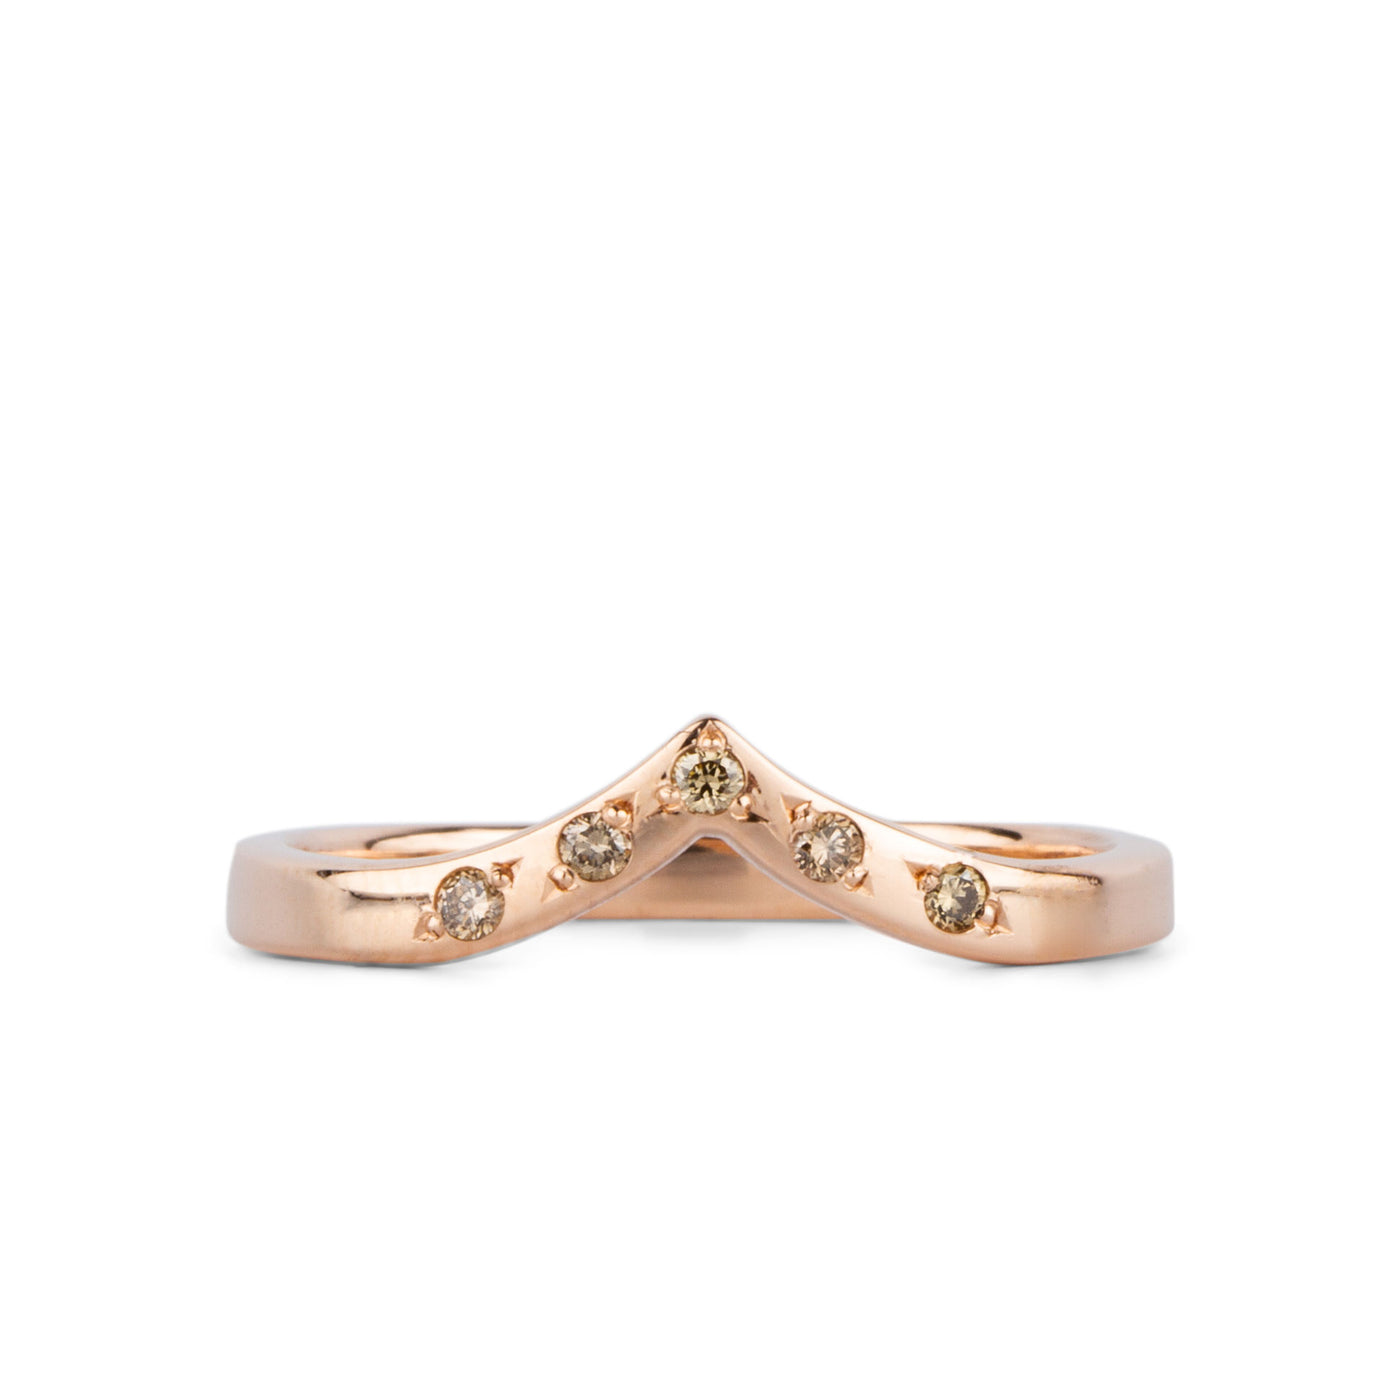 Peaked 14k rose gold band with five champagne diamonds in delicate star settings on a white background